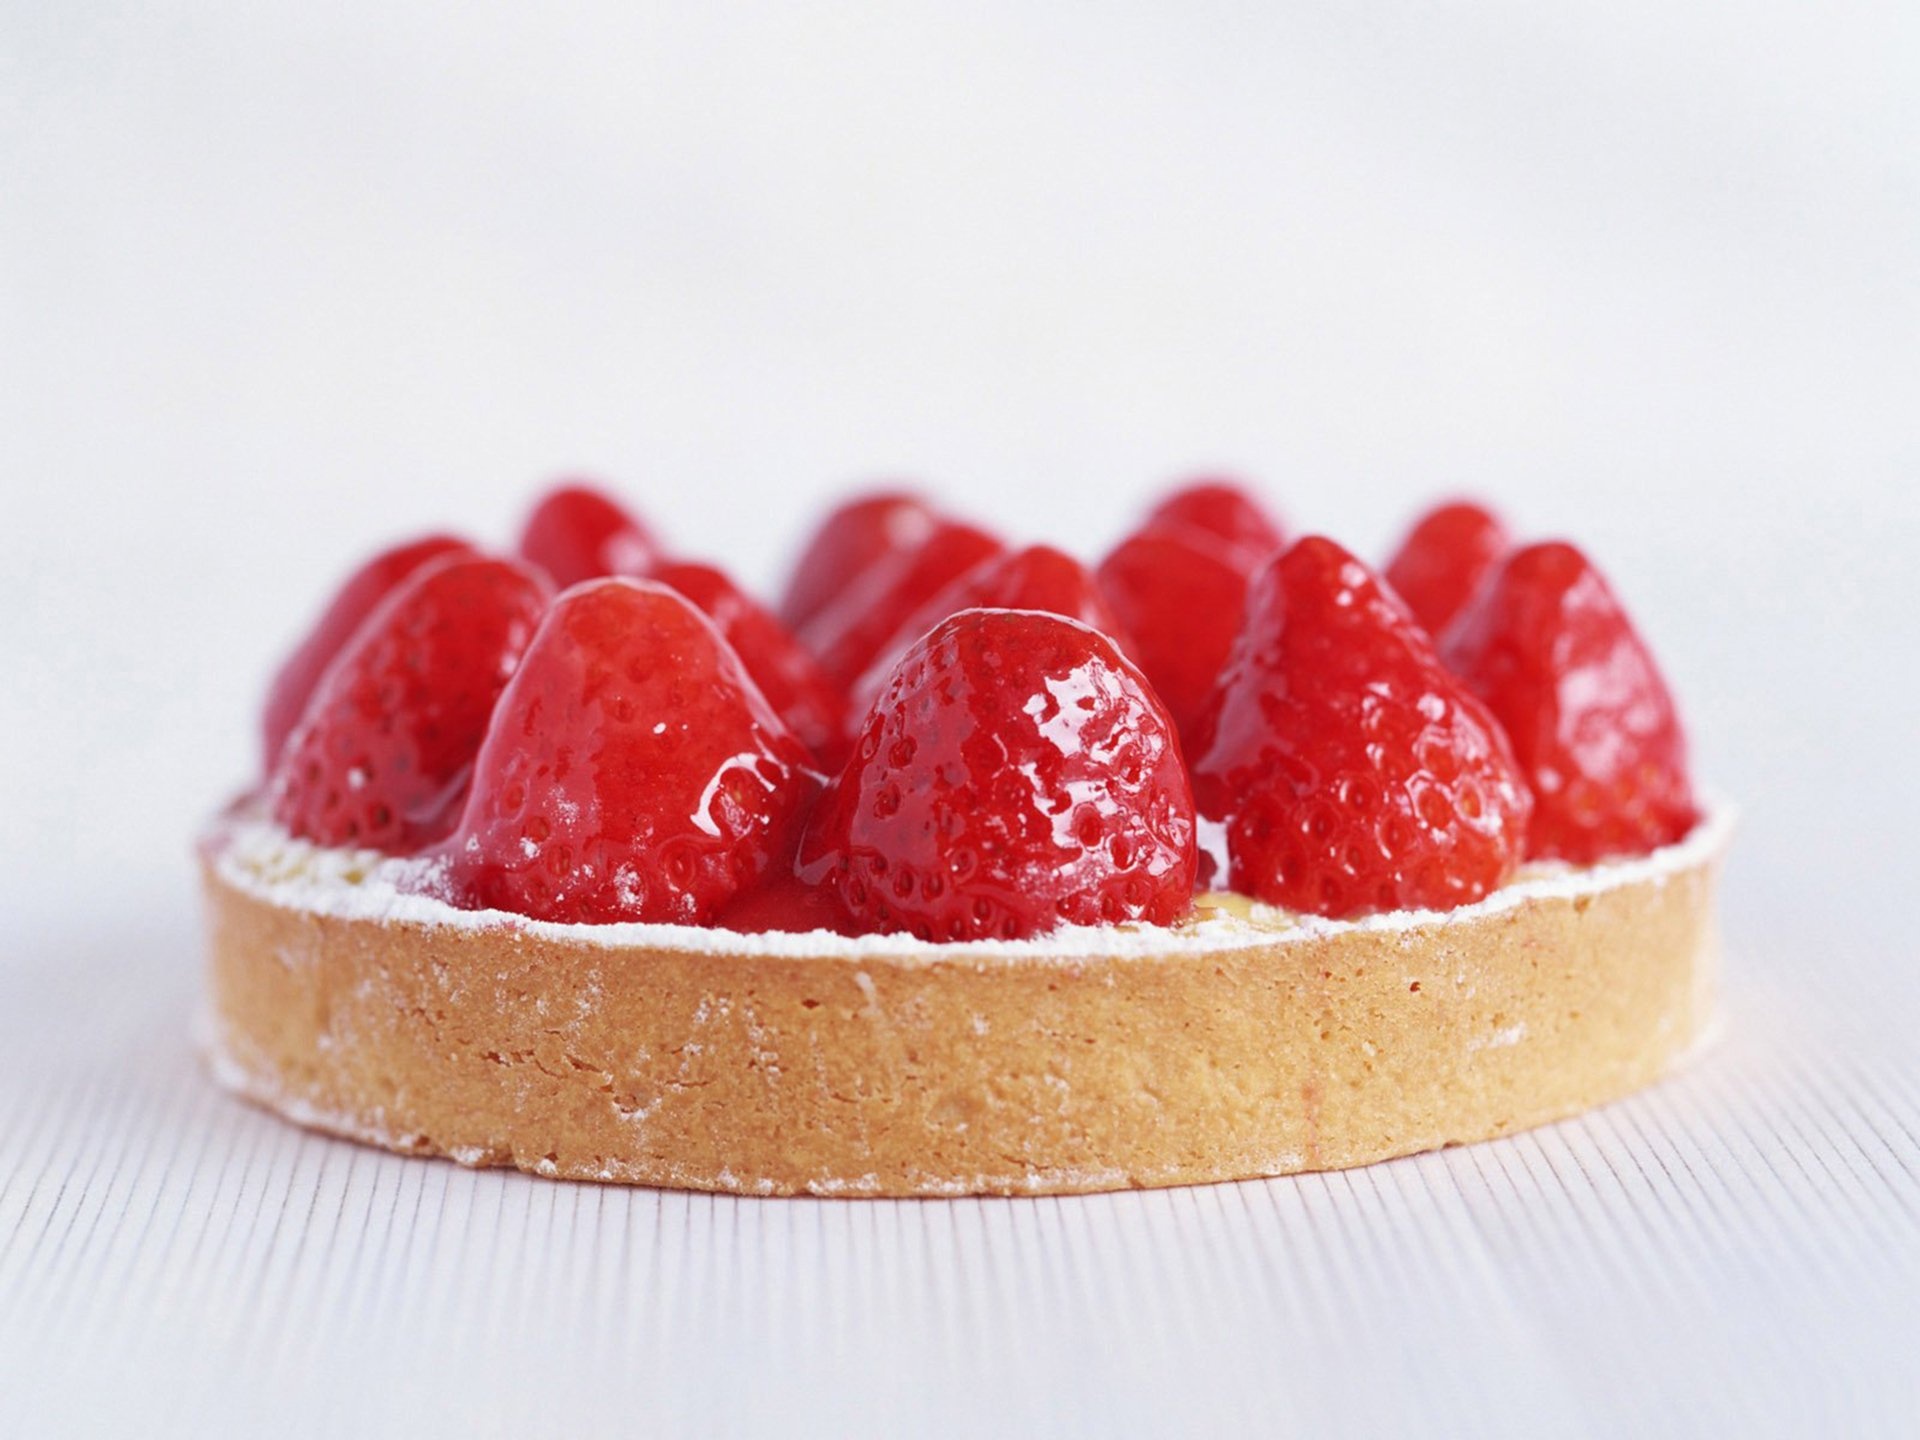 Tart: Have a layer of pastry cream or custard to hold the fruit in place. 1920x1440 HD Background.